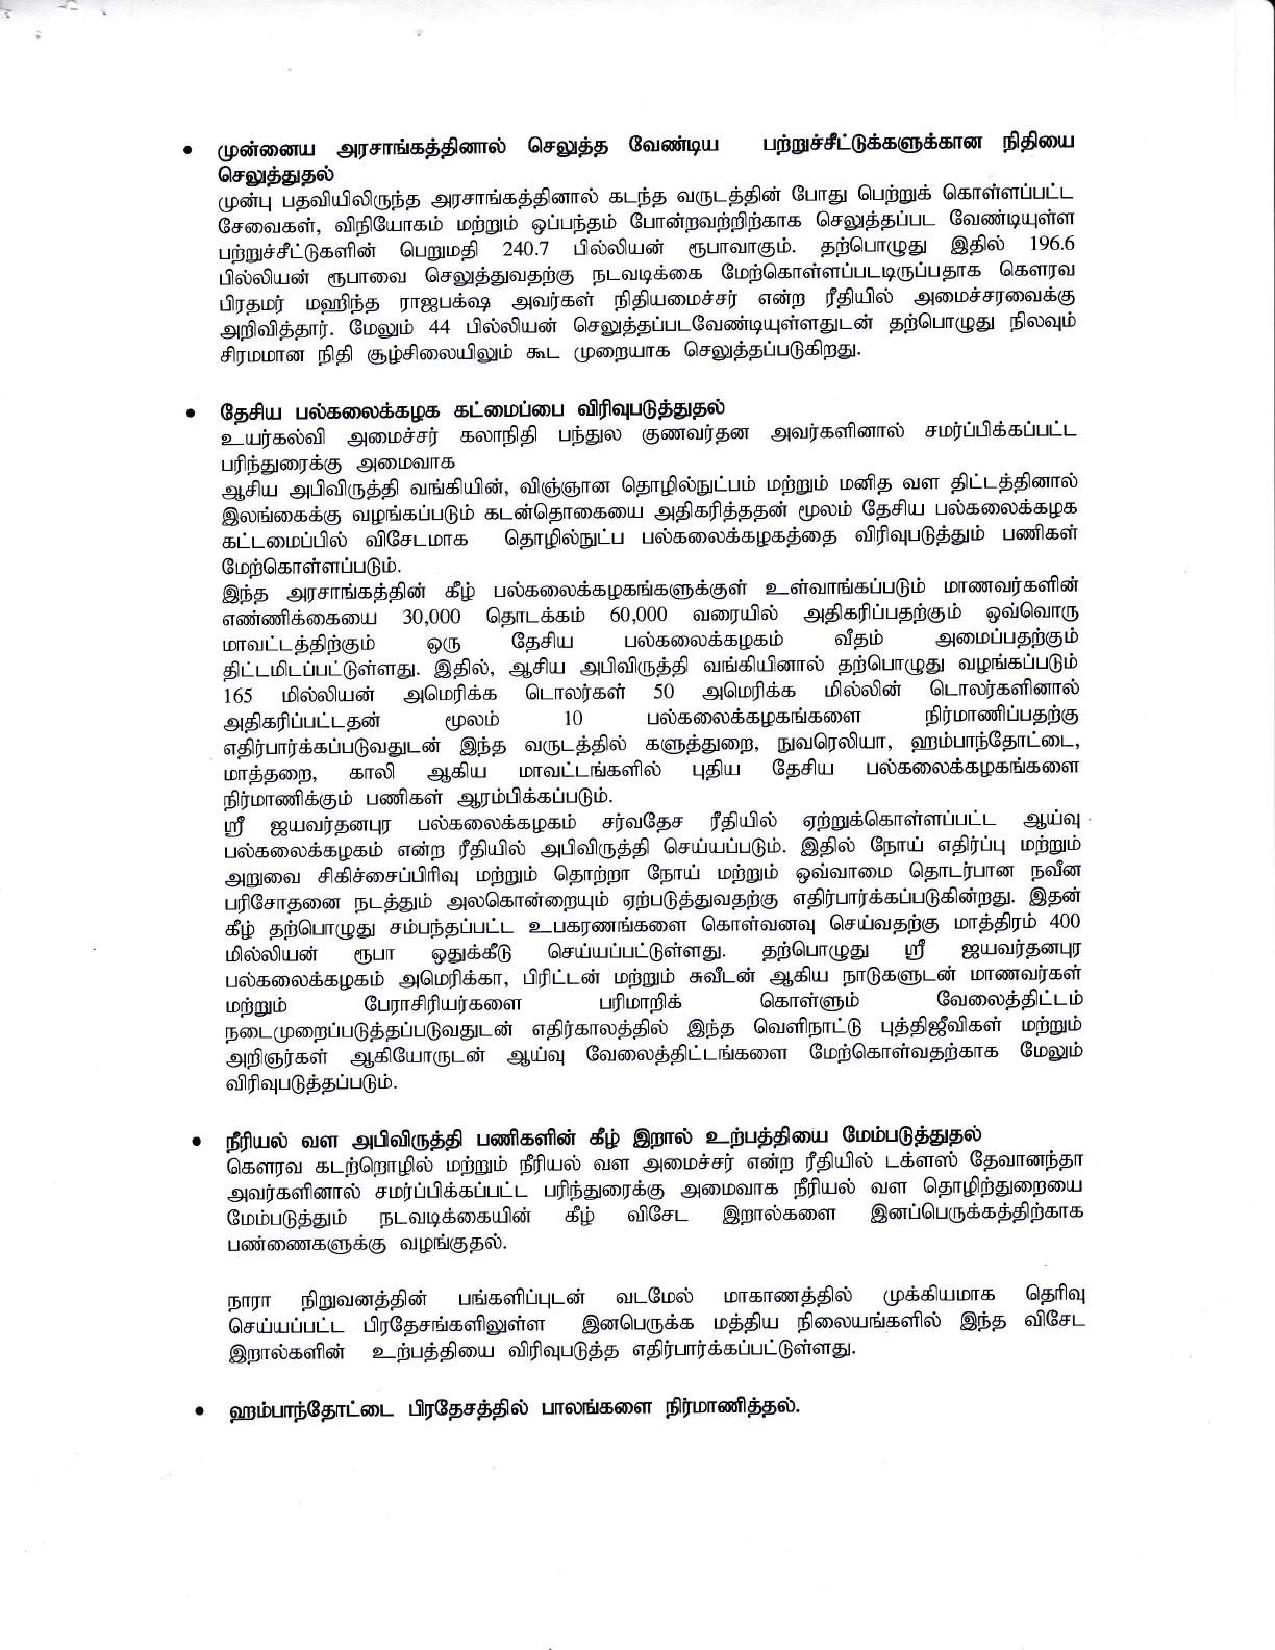 Cabinet Tamil compressed page 002